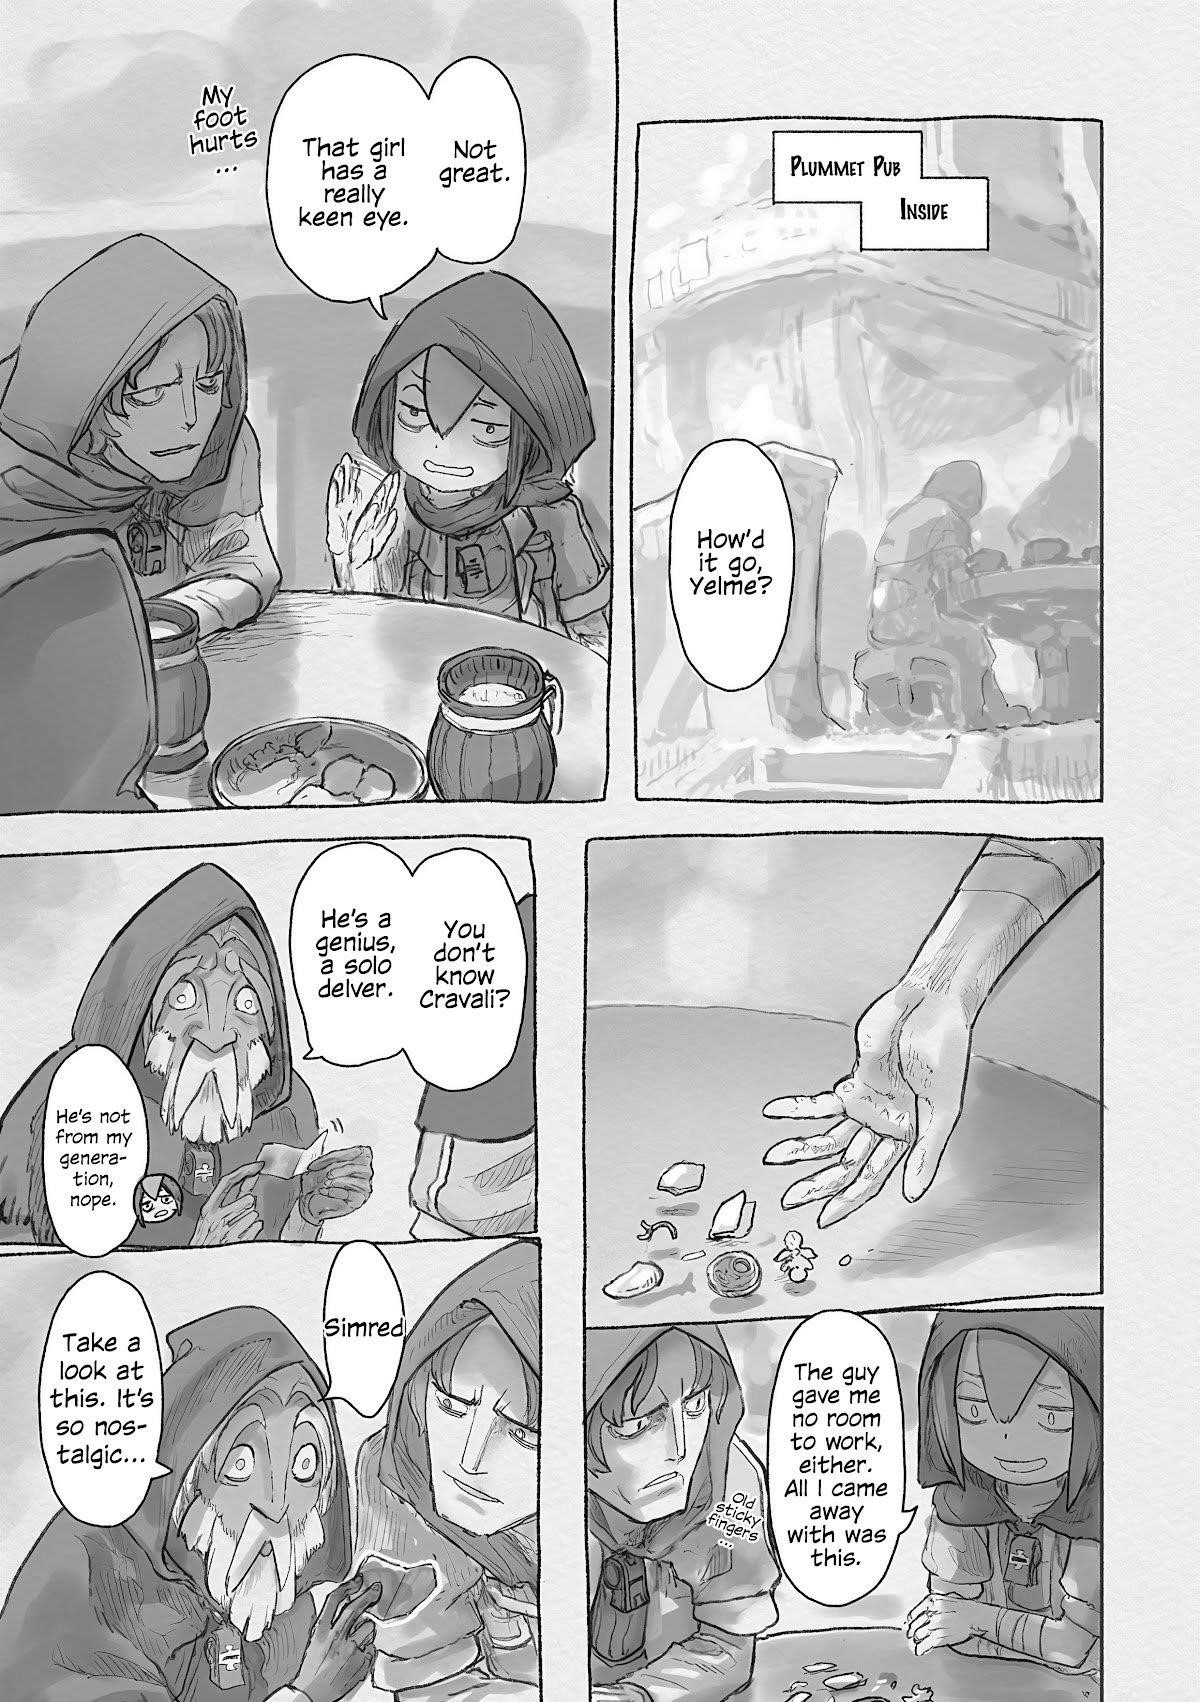 Made In Abyss Chapter 63 Made in Abyss, Chapter 63 - Made in Abyss Manga Online